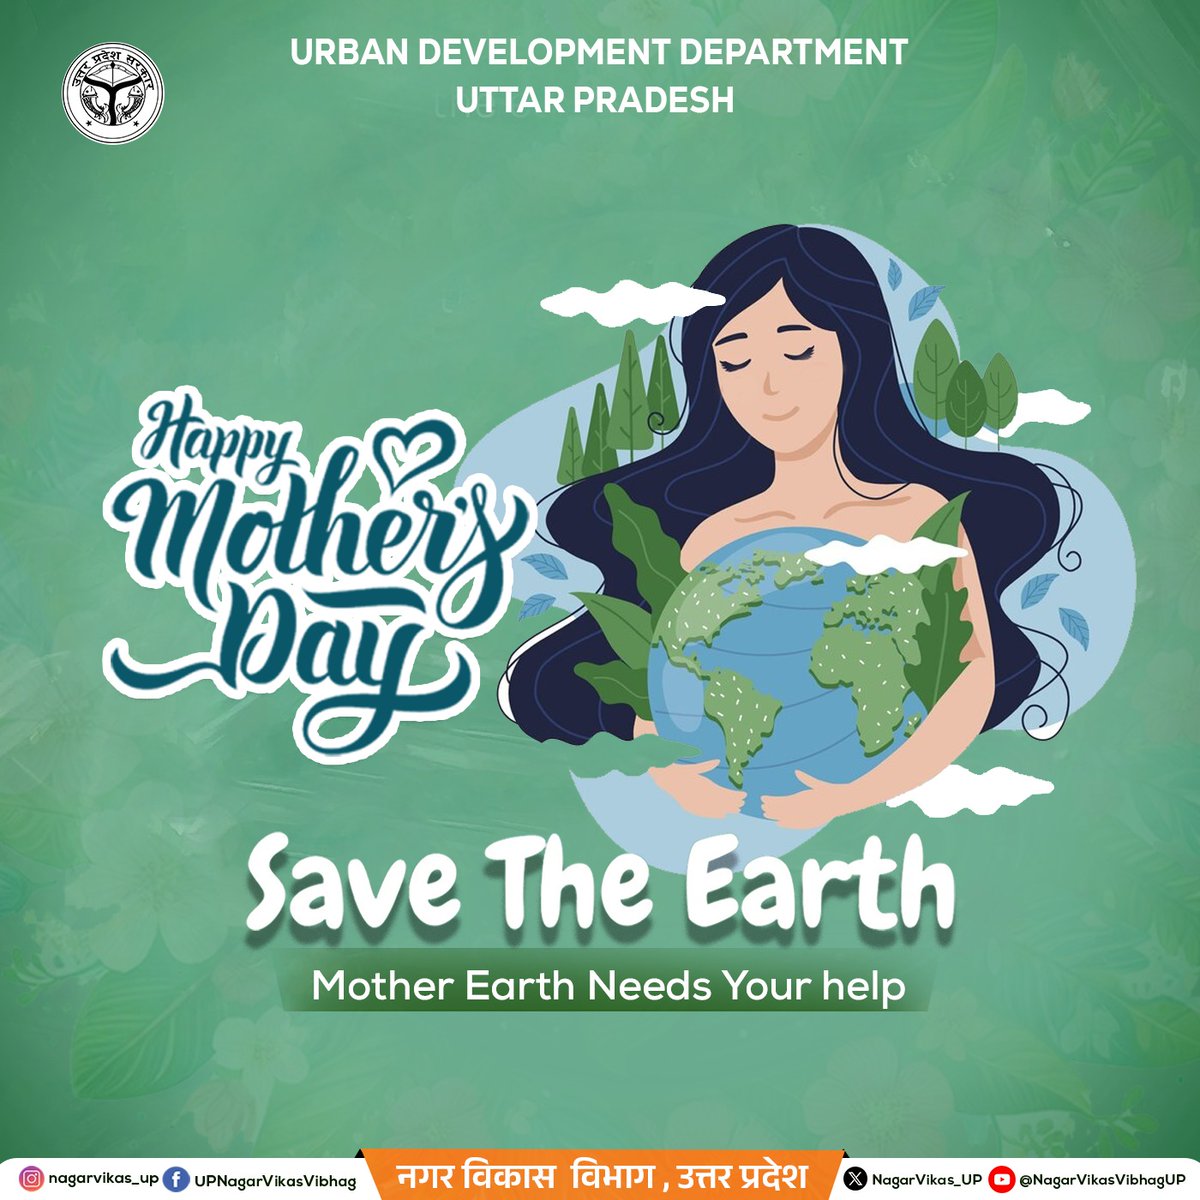 🌿🌏 This Mother’s Day, let’s also cherish our Earth Mother! Take action with us to ensure her health and beauty endure. 🌺

🔄 Share this message and be part of the change!

#MothersDay #SaveTheEarth #ActNow #UttarPradesh